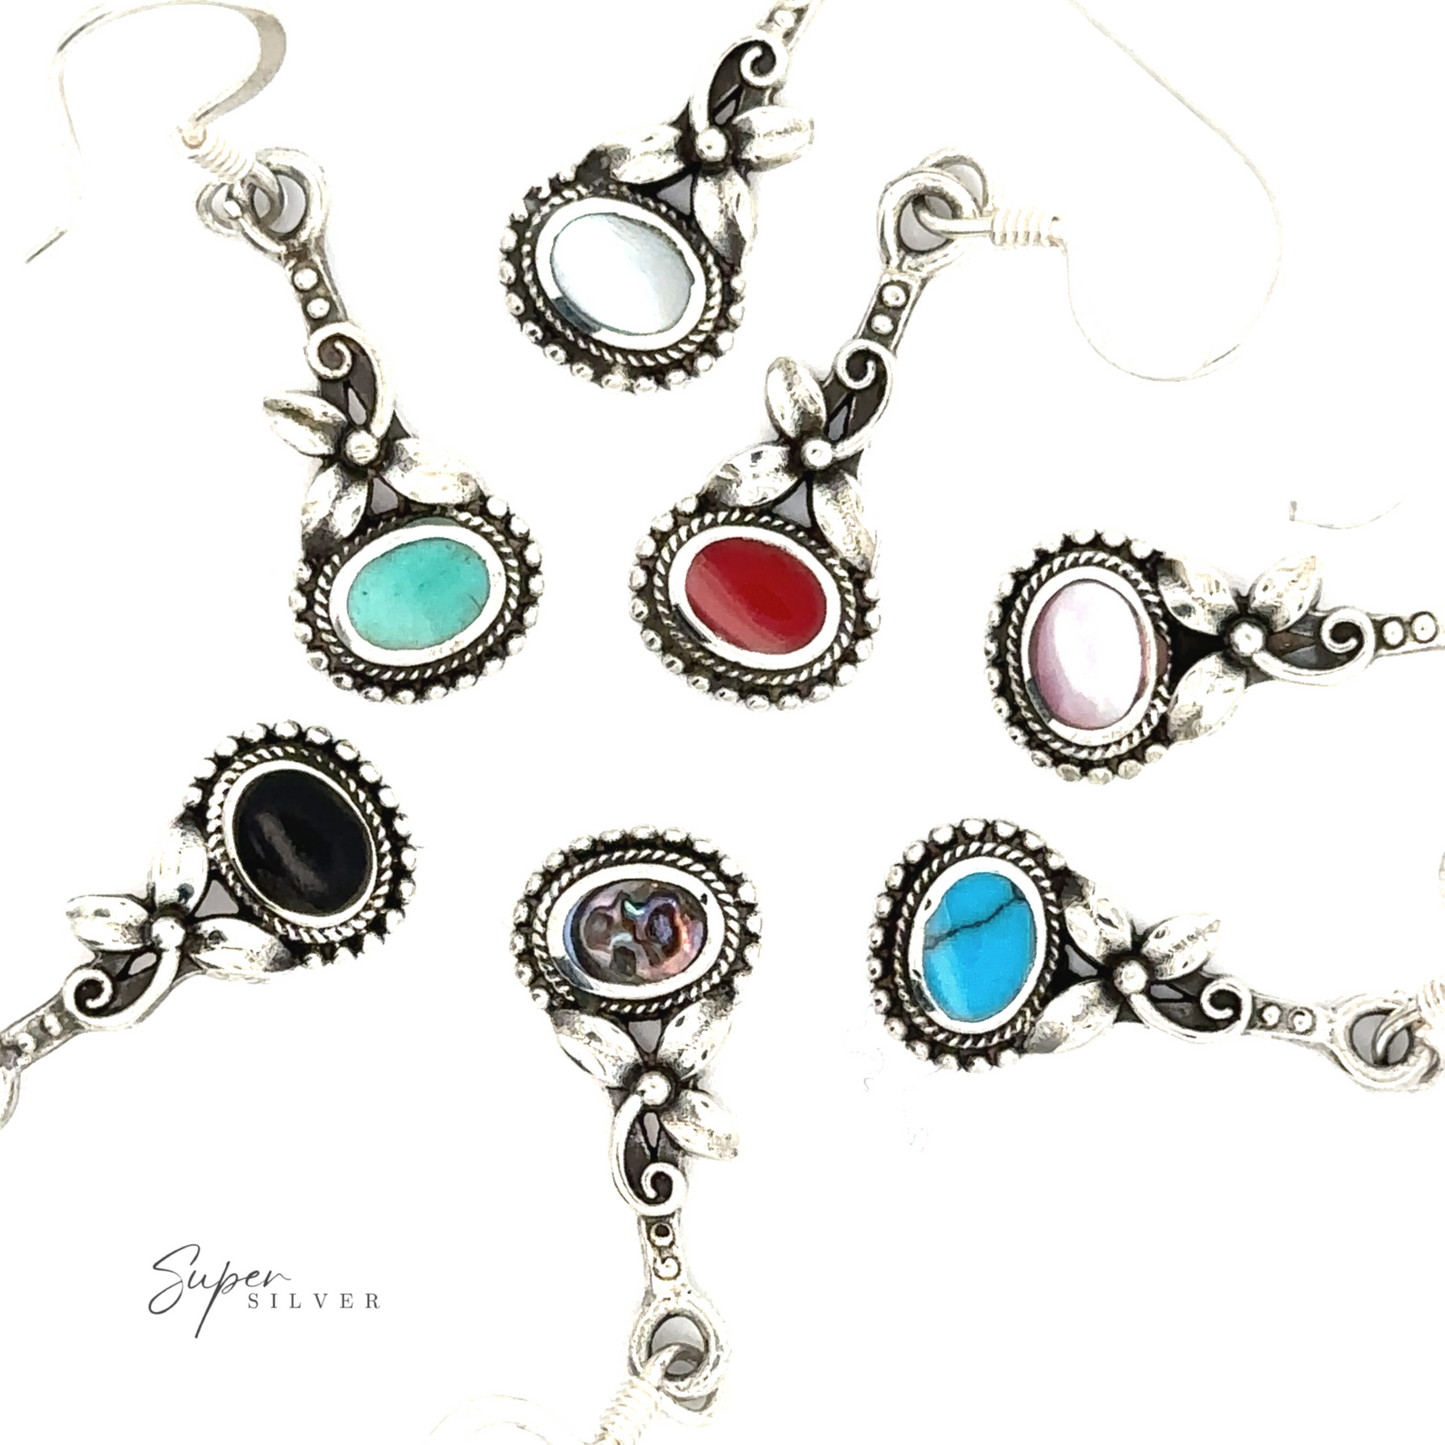 A group of Inlaid Flower Earrings with Oval Stone, offering boho elegance and vintage charm.